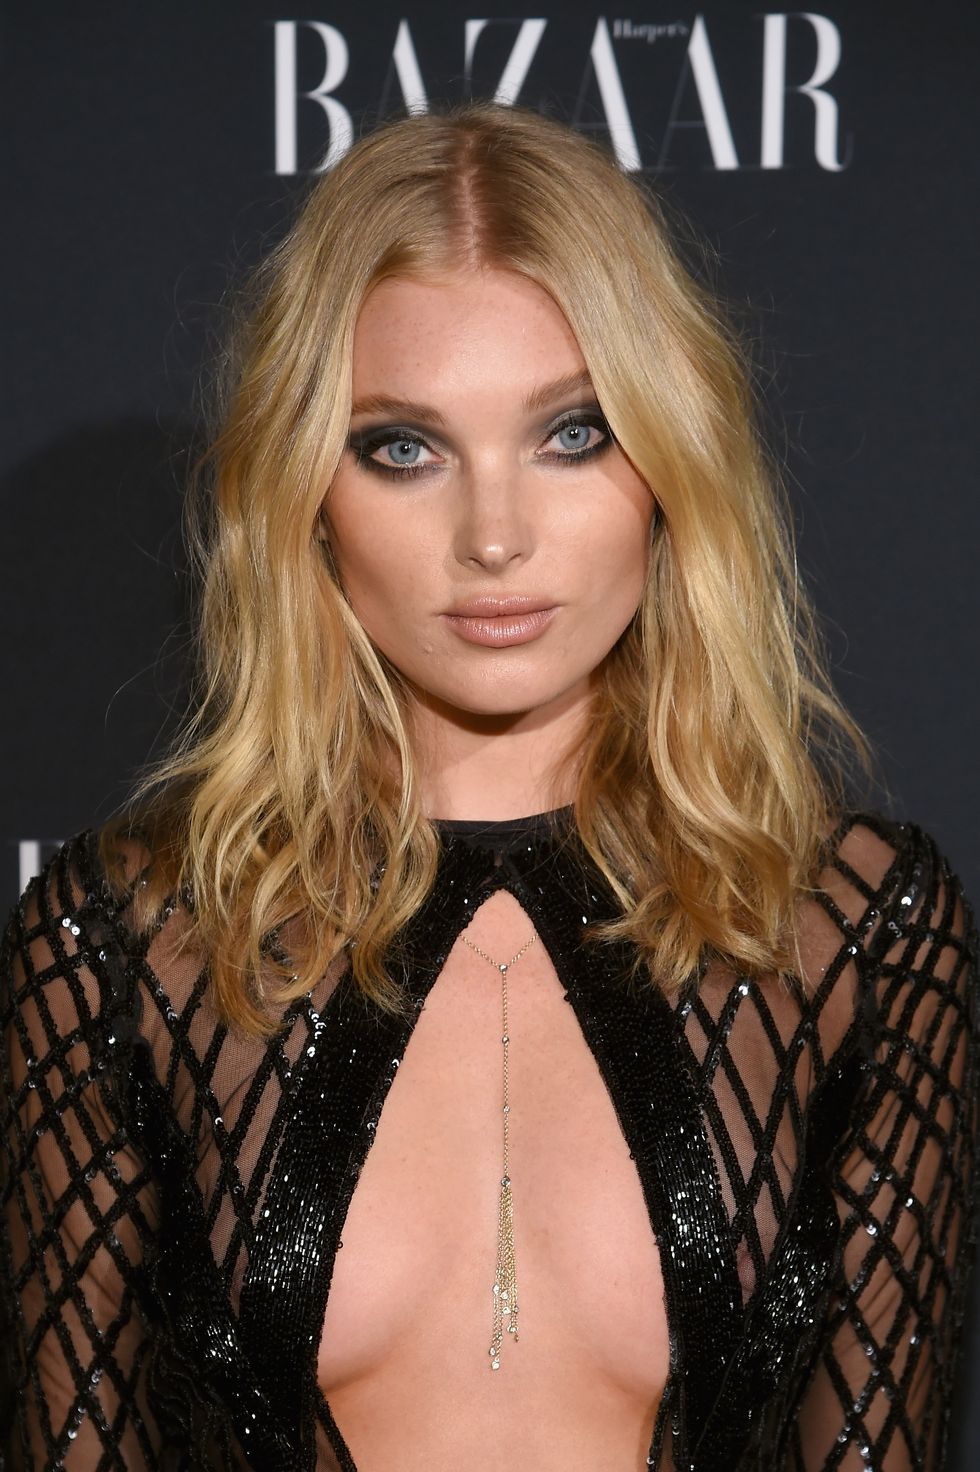 https://hips.hearstapps.com/hmg-prod/images/elsa-hosk-attends-harpers-bazaar-celebration-of-icons-by-news-photo-844532426-1564697073.jpg?crop=1xw:1xh;center,top&resize=980:*